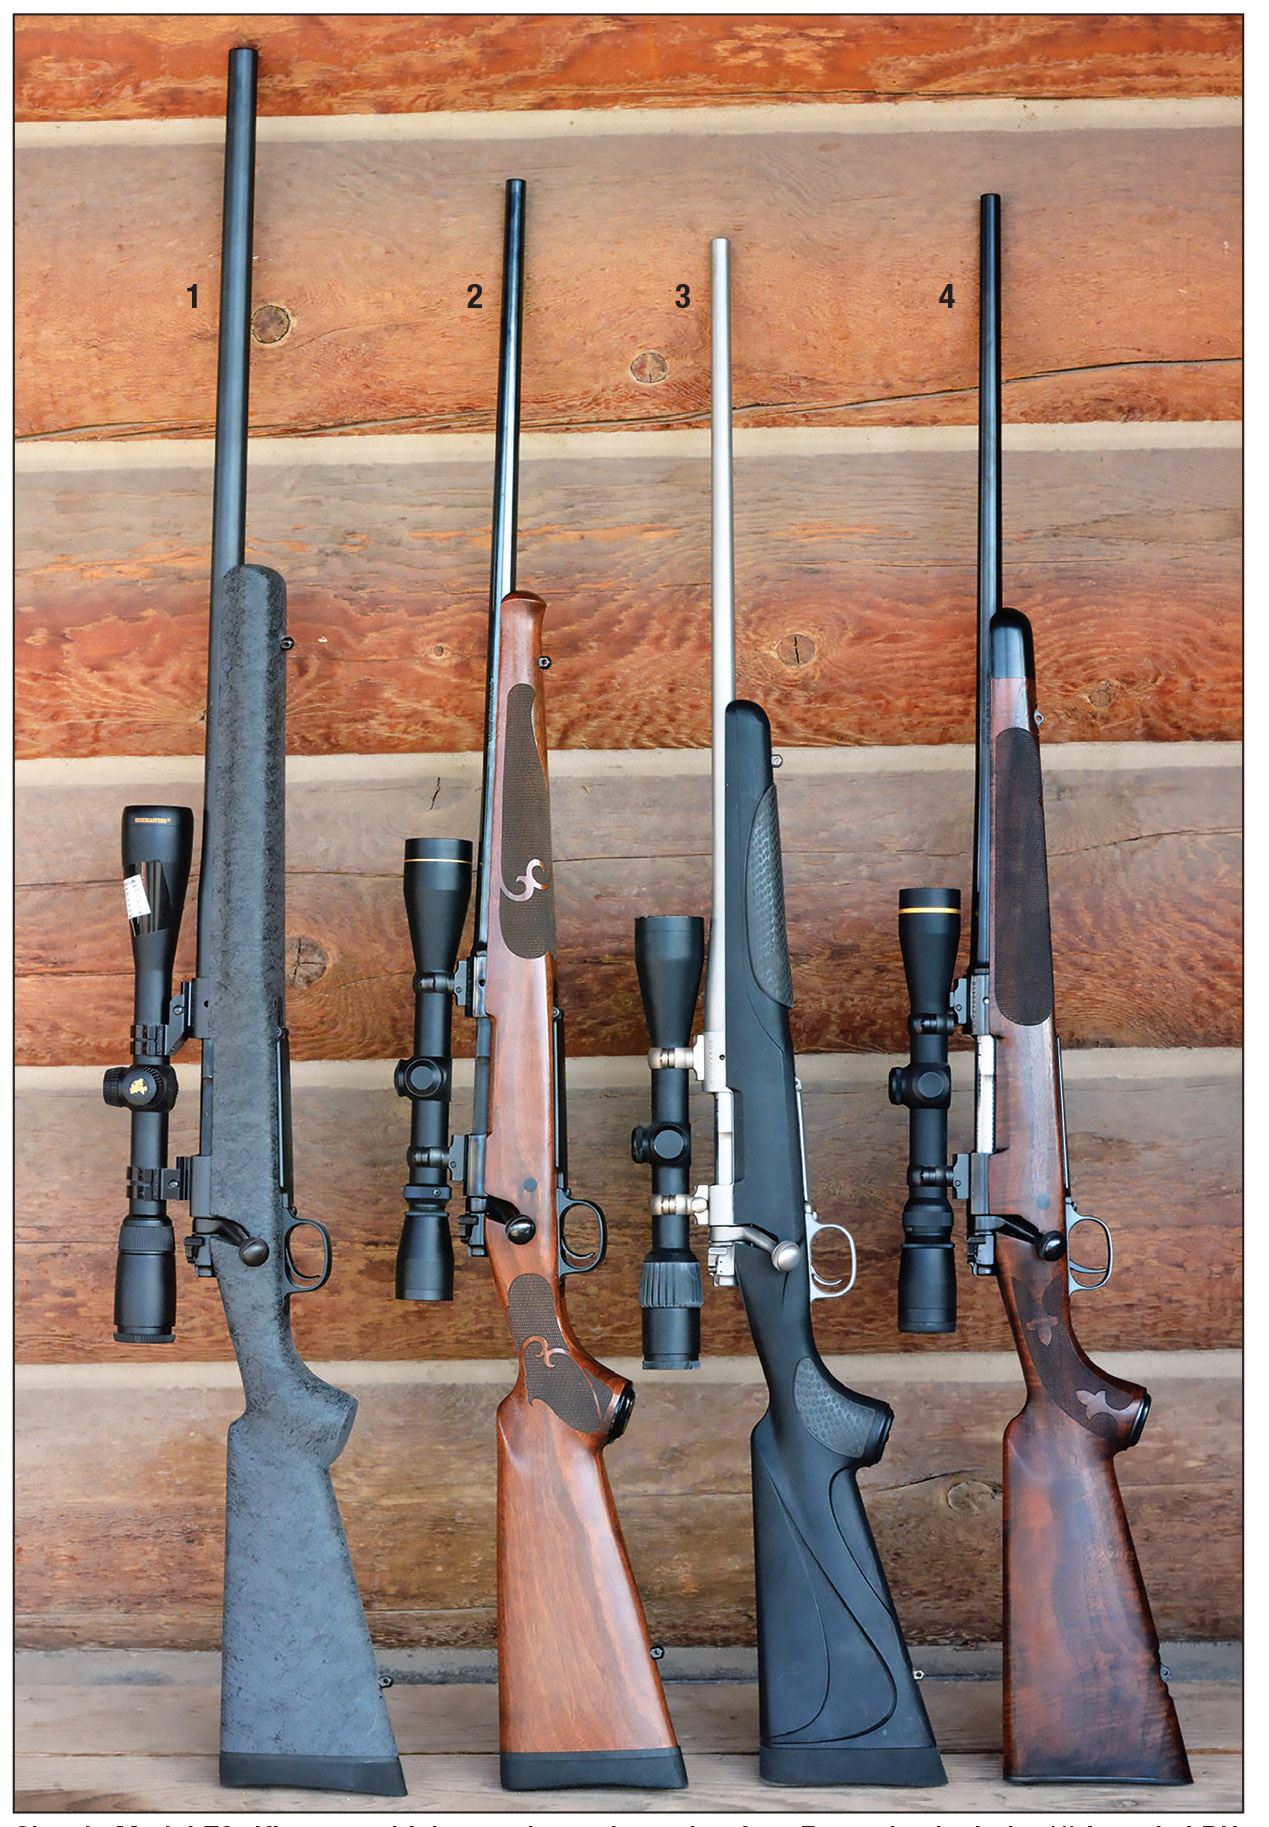 Classic Model 70 rifles are widely popular and sought after. Examples include: (1) Laredo LRH 300 Winchester Magnum, (2) Featherweight 280 Remington, (3) Stainless Steel 25 WSSM and (4) Featherweight Jack O’Connor Tribute Rifle chambered in 270 Winchester.